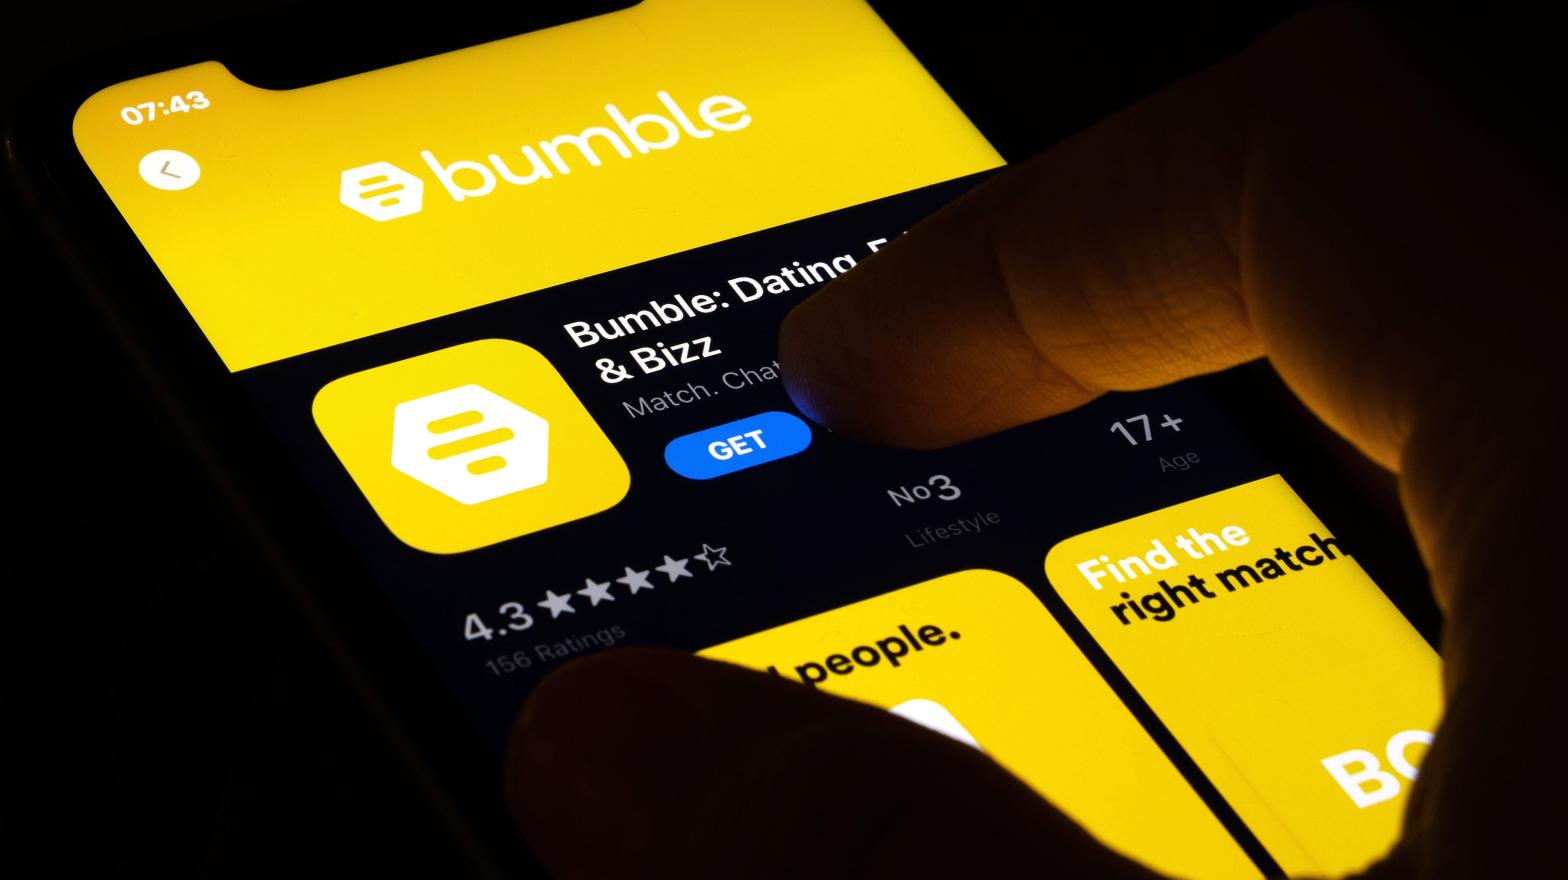 Bumble speed dating is following the BeReal example of scheduled app interactions.  (Image: Boumen Japet, Shutterstock)